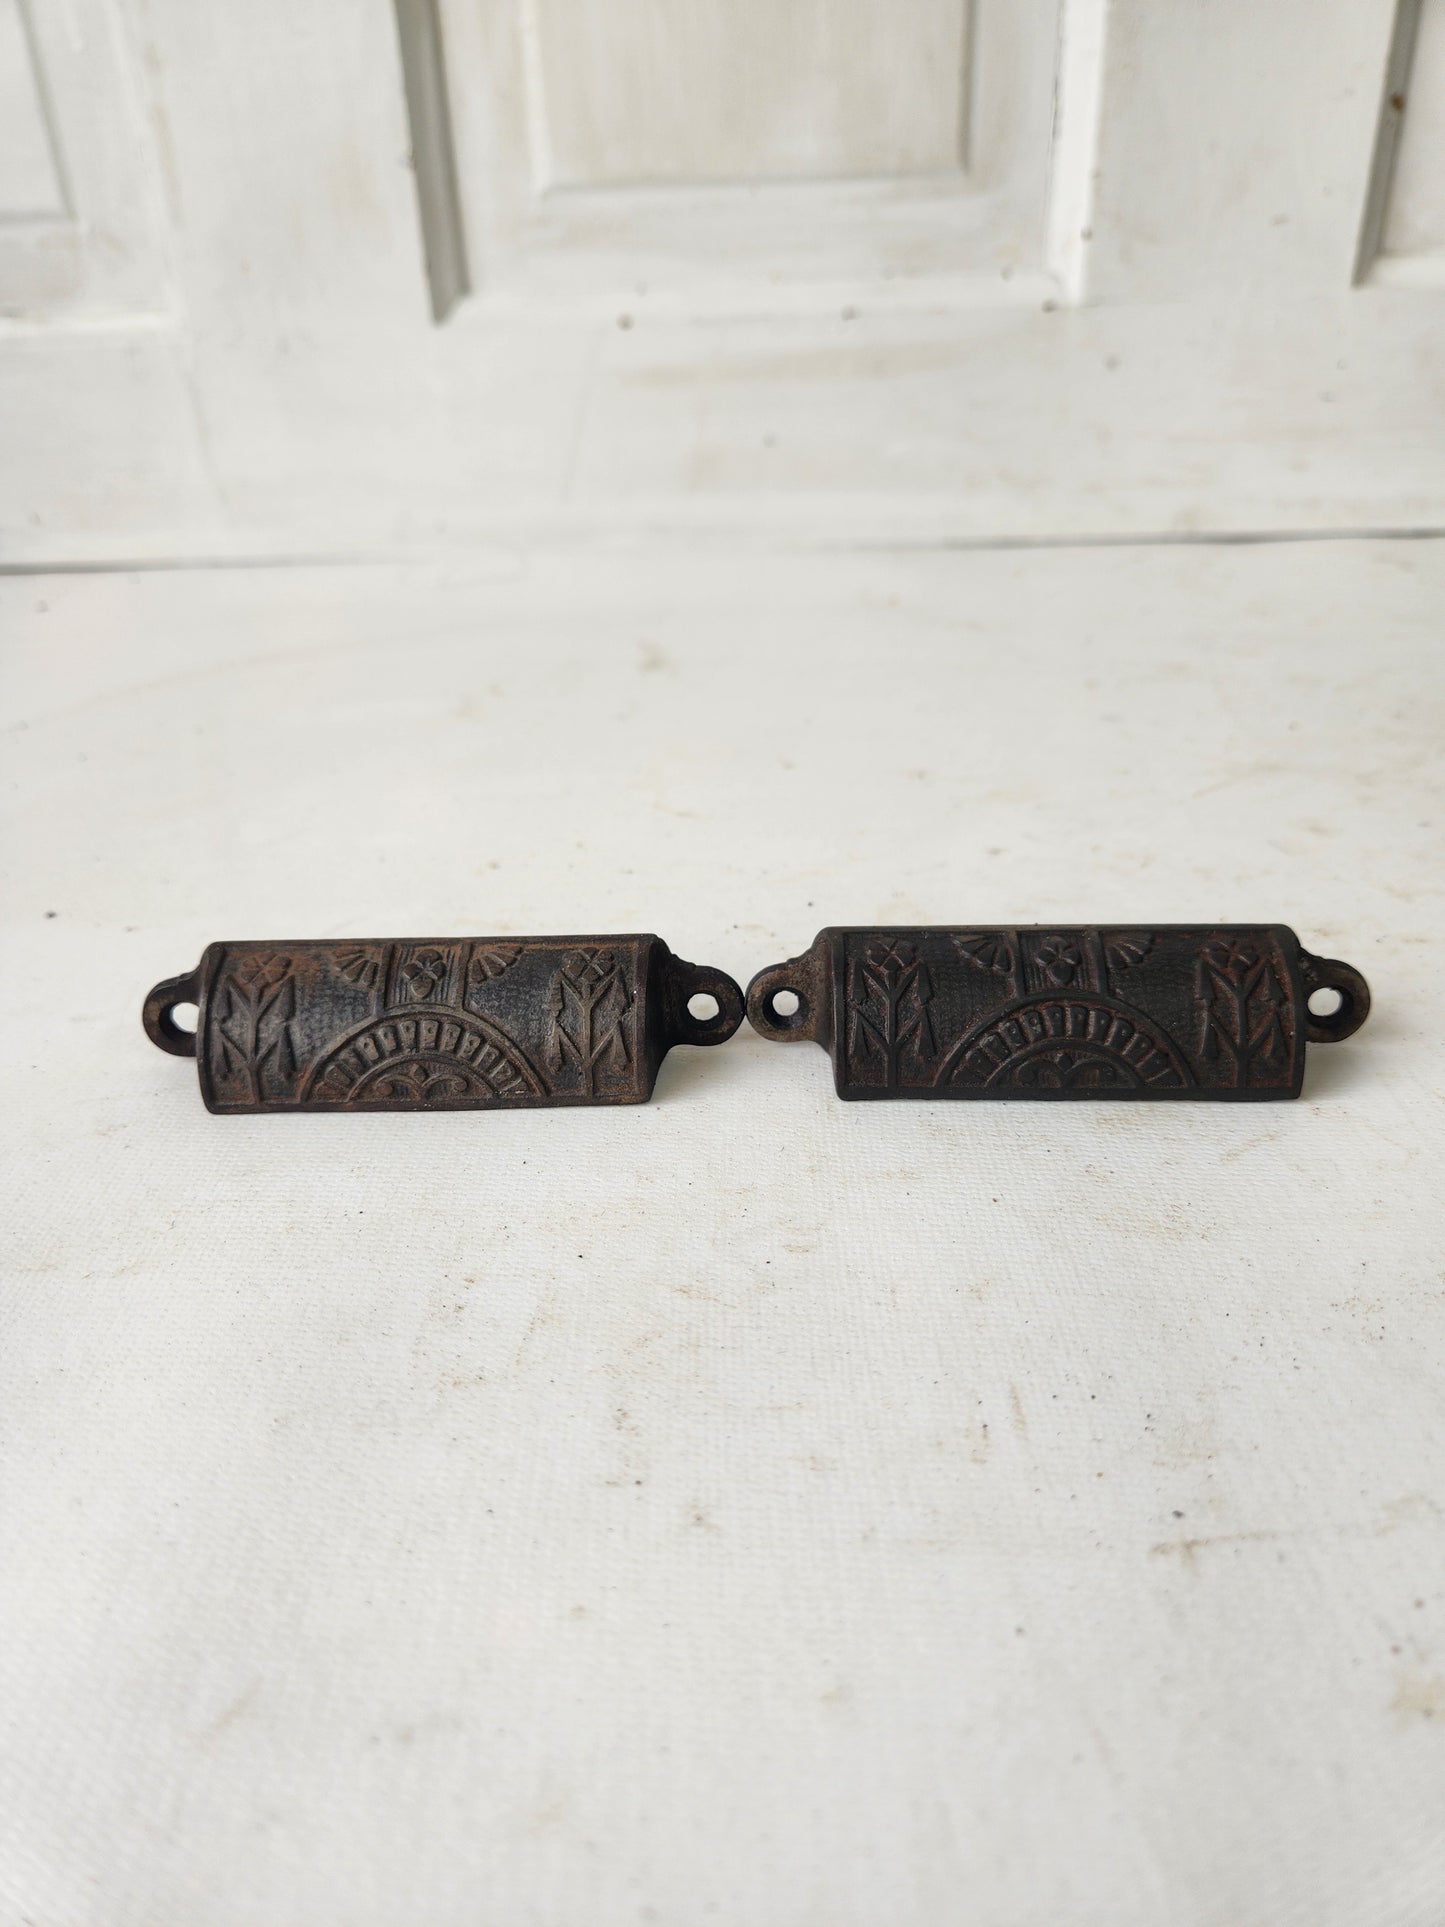 Set of 2 Antique Eastlake Drawer Pulls, Antique Cast Iron Furniture or Apothecary Handles, 012406